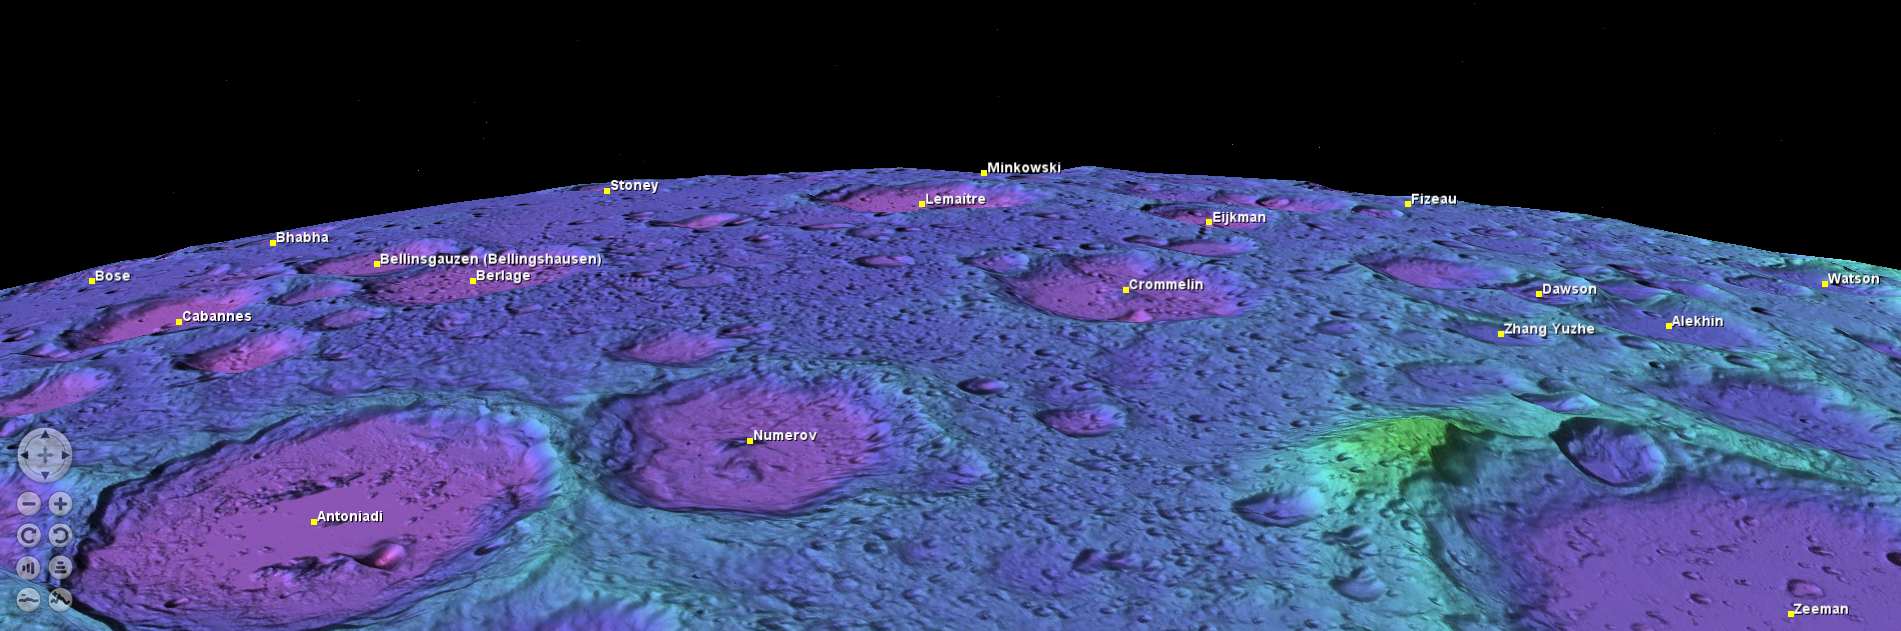 South Pole LOLA Color Shaded Relief Projection